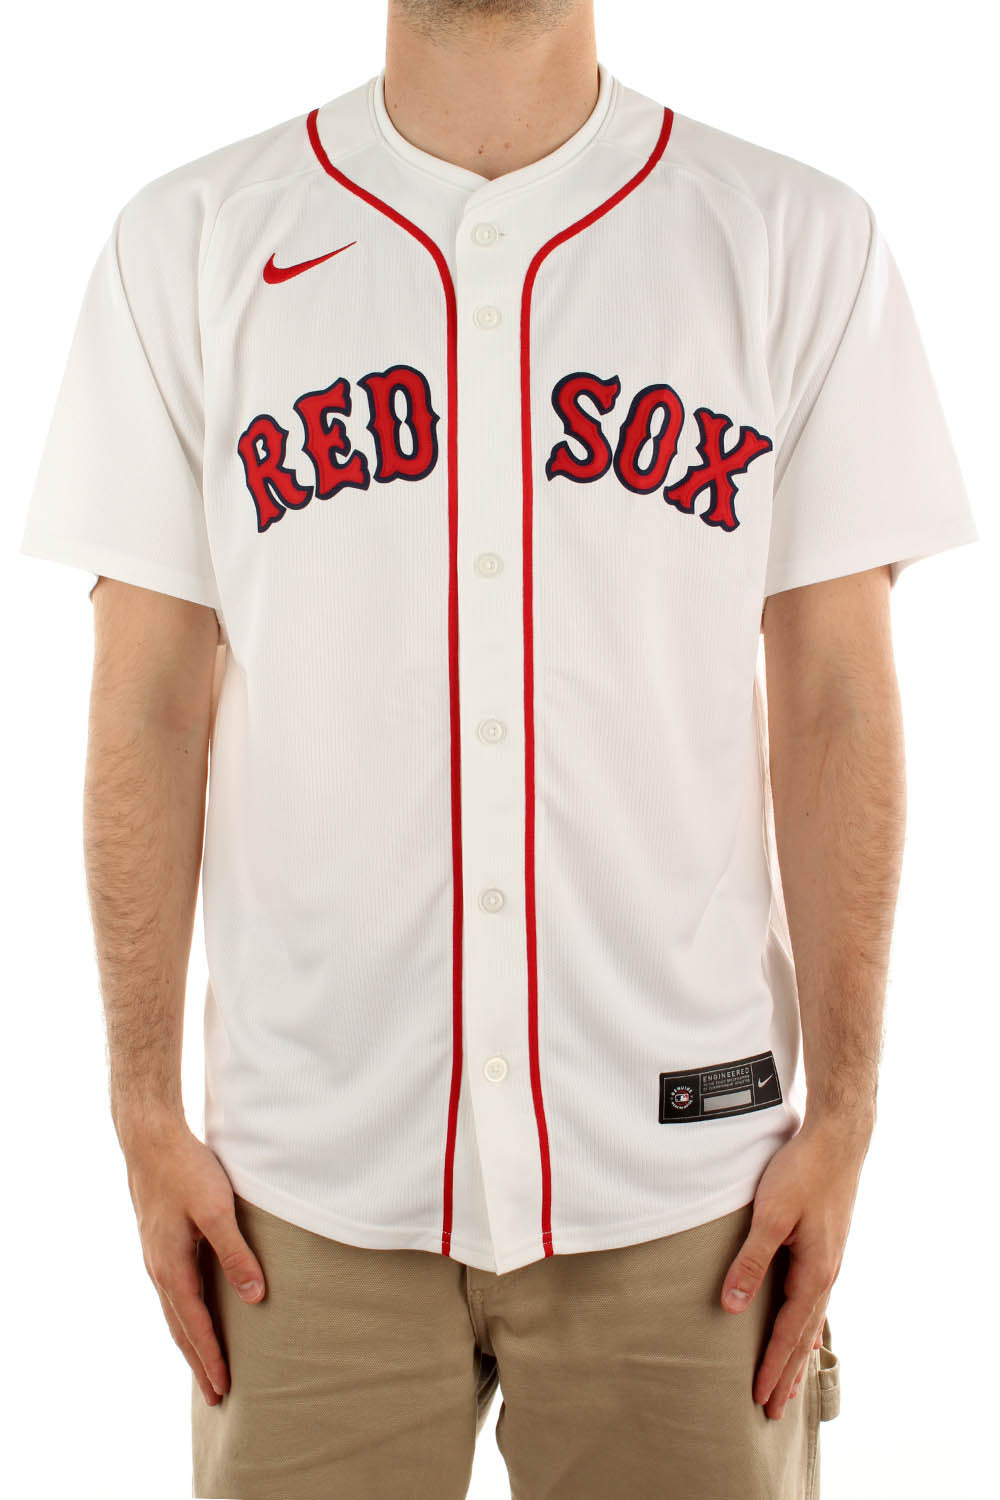 Maillot Nike Mlb Limited Domicile Boston Red Sox